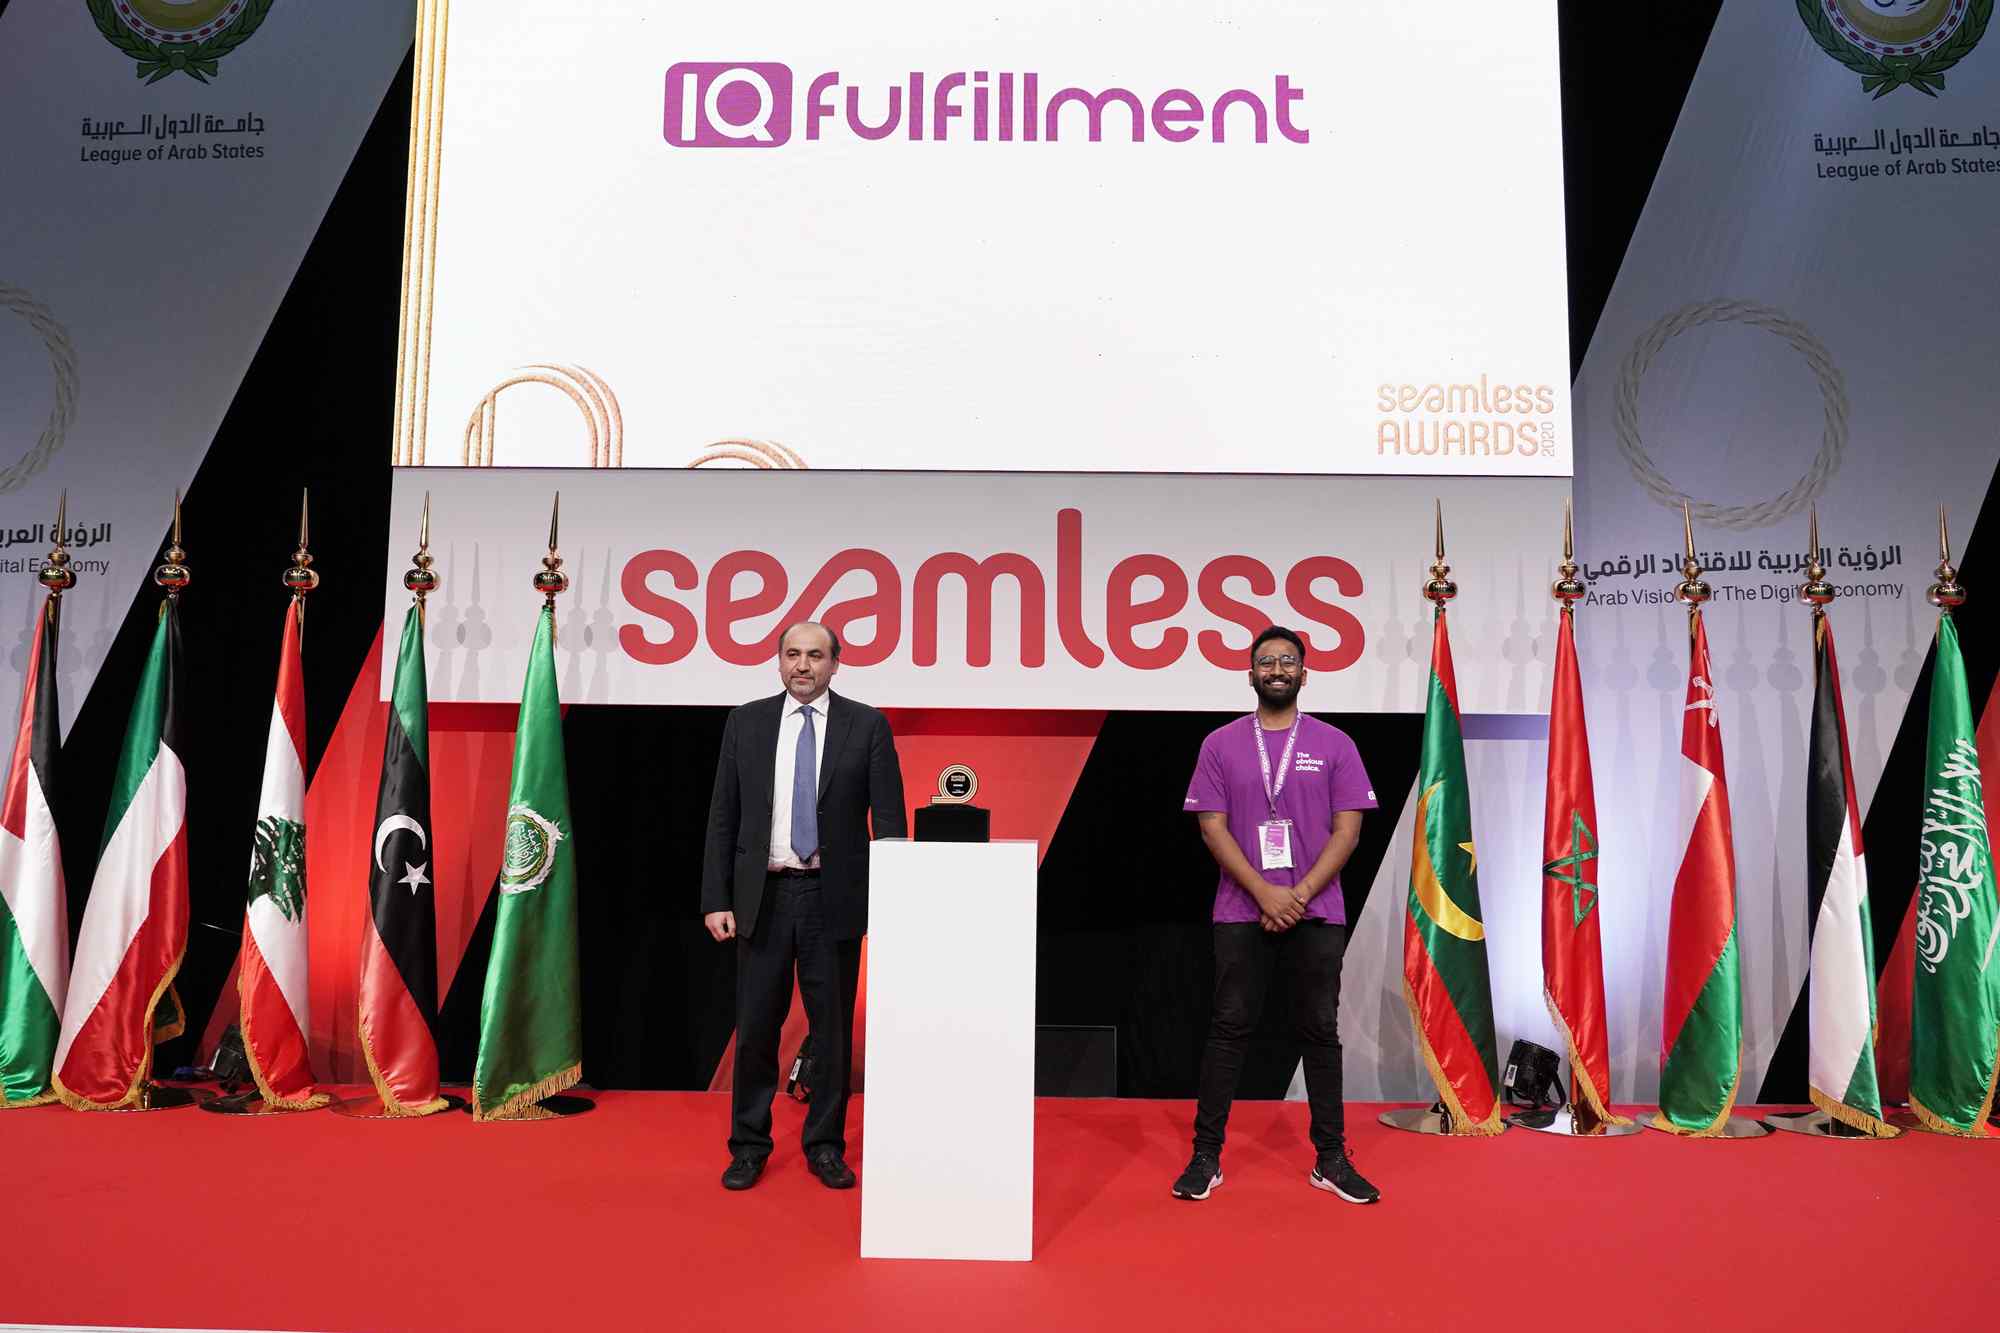 IQ Fulfillment Awarded E-commerce Start-Up of the Year at Seamless Middle East 2020